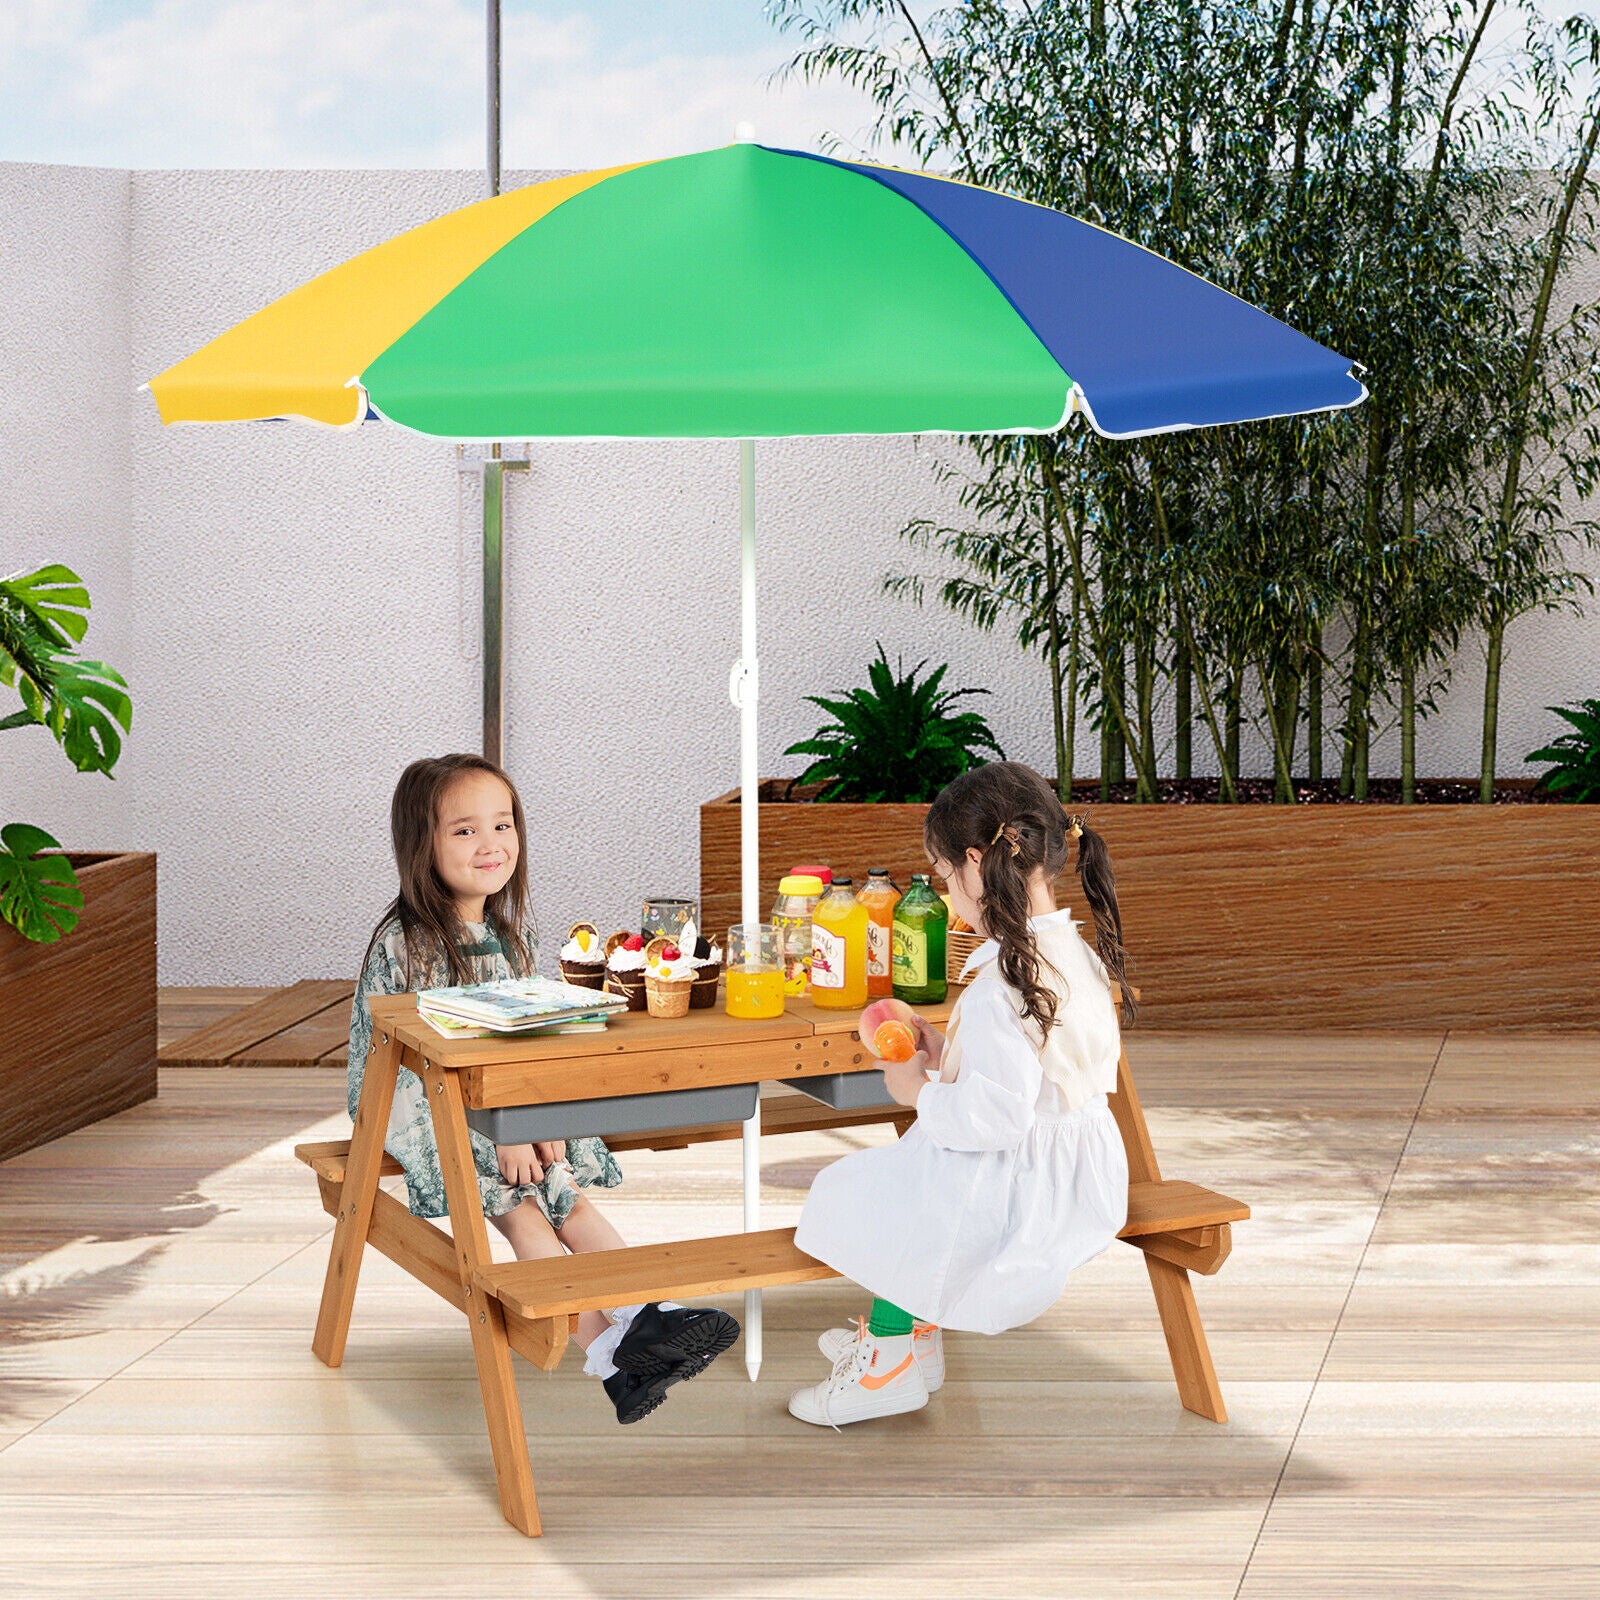 Kids Outdoor Picnic Water Sand Table Bench Set with Umbrella and Play Boxes